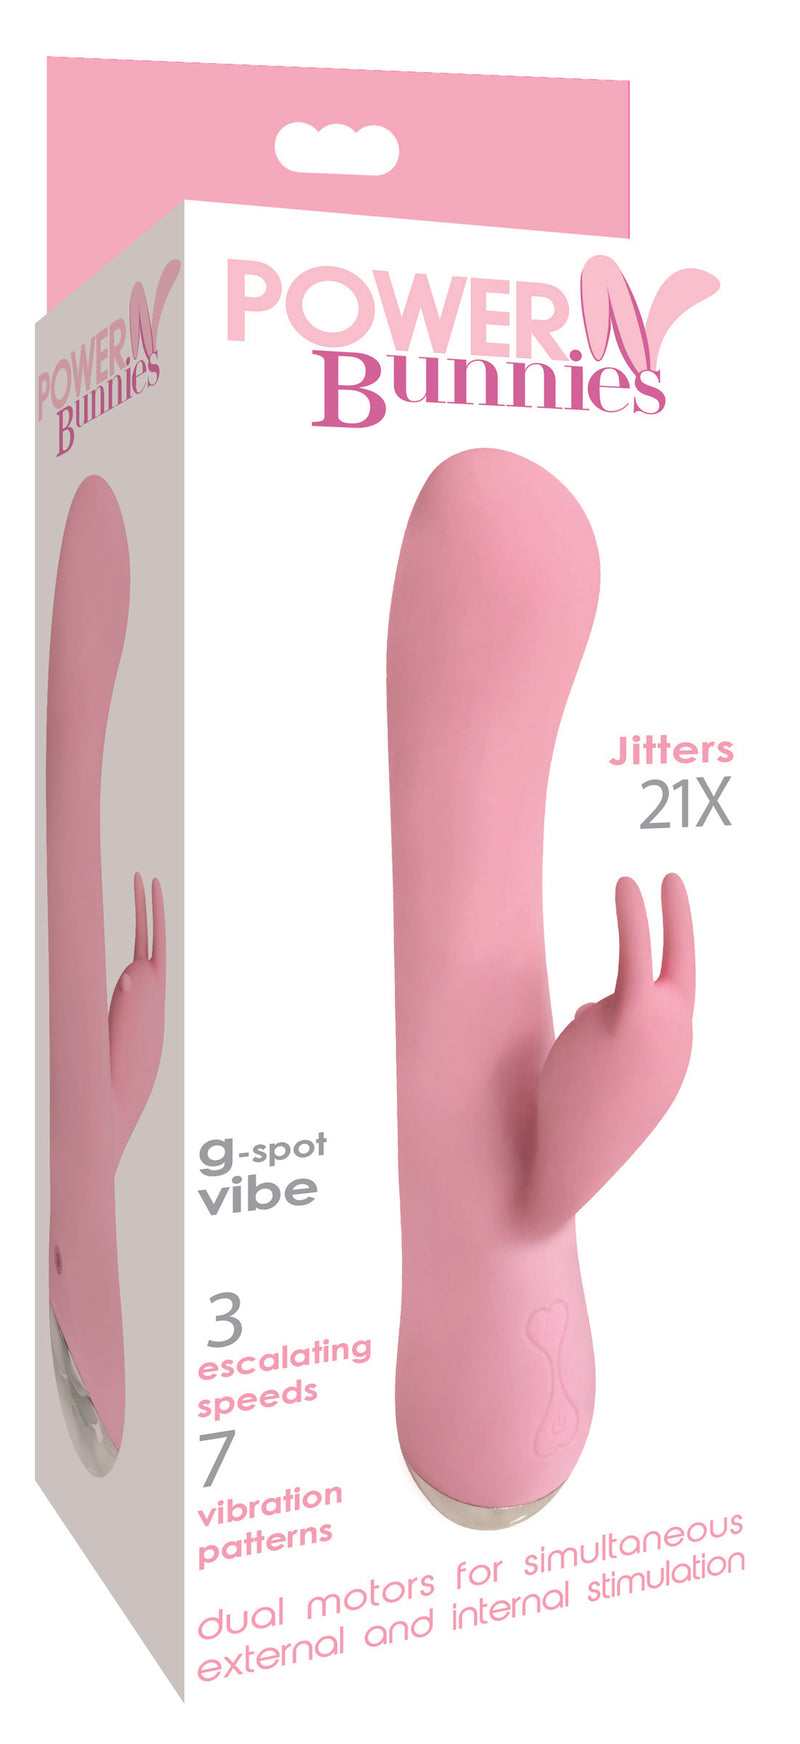 Jitters 21X Silicone Rabbit Vibrator Rabbits from Power Bunnies